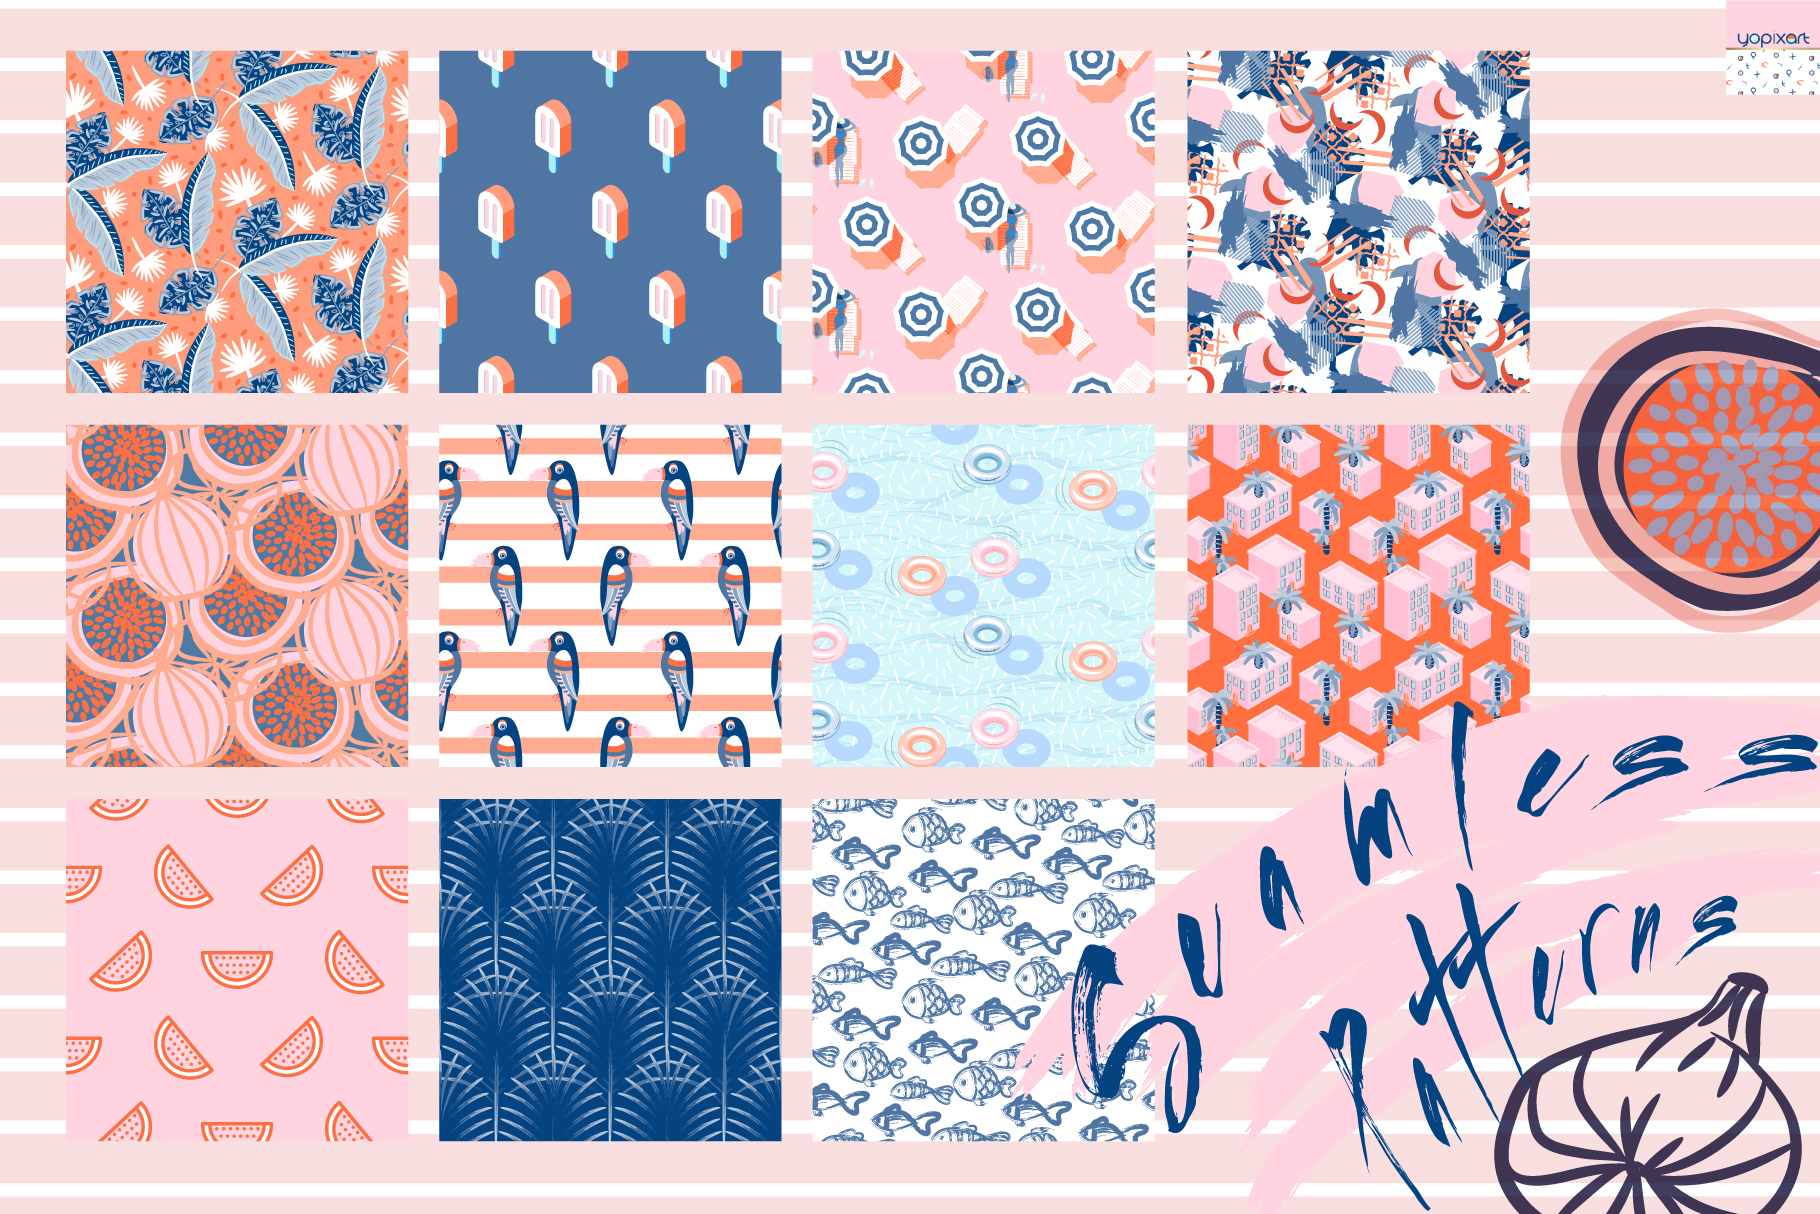 Summer Vibes - Graphics & Patterns